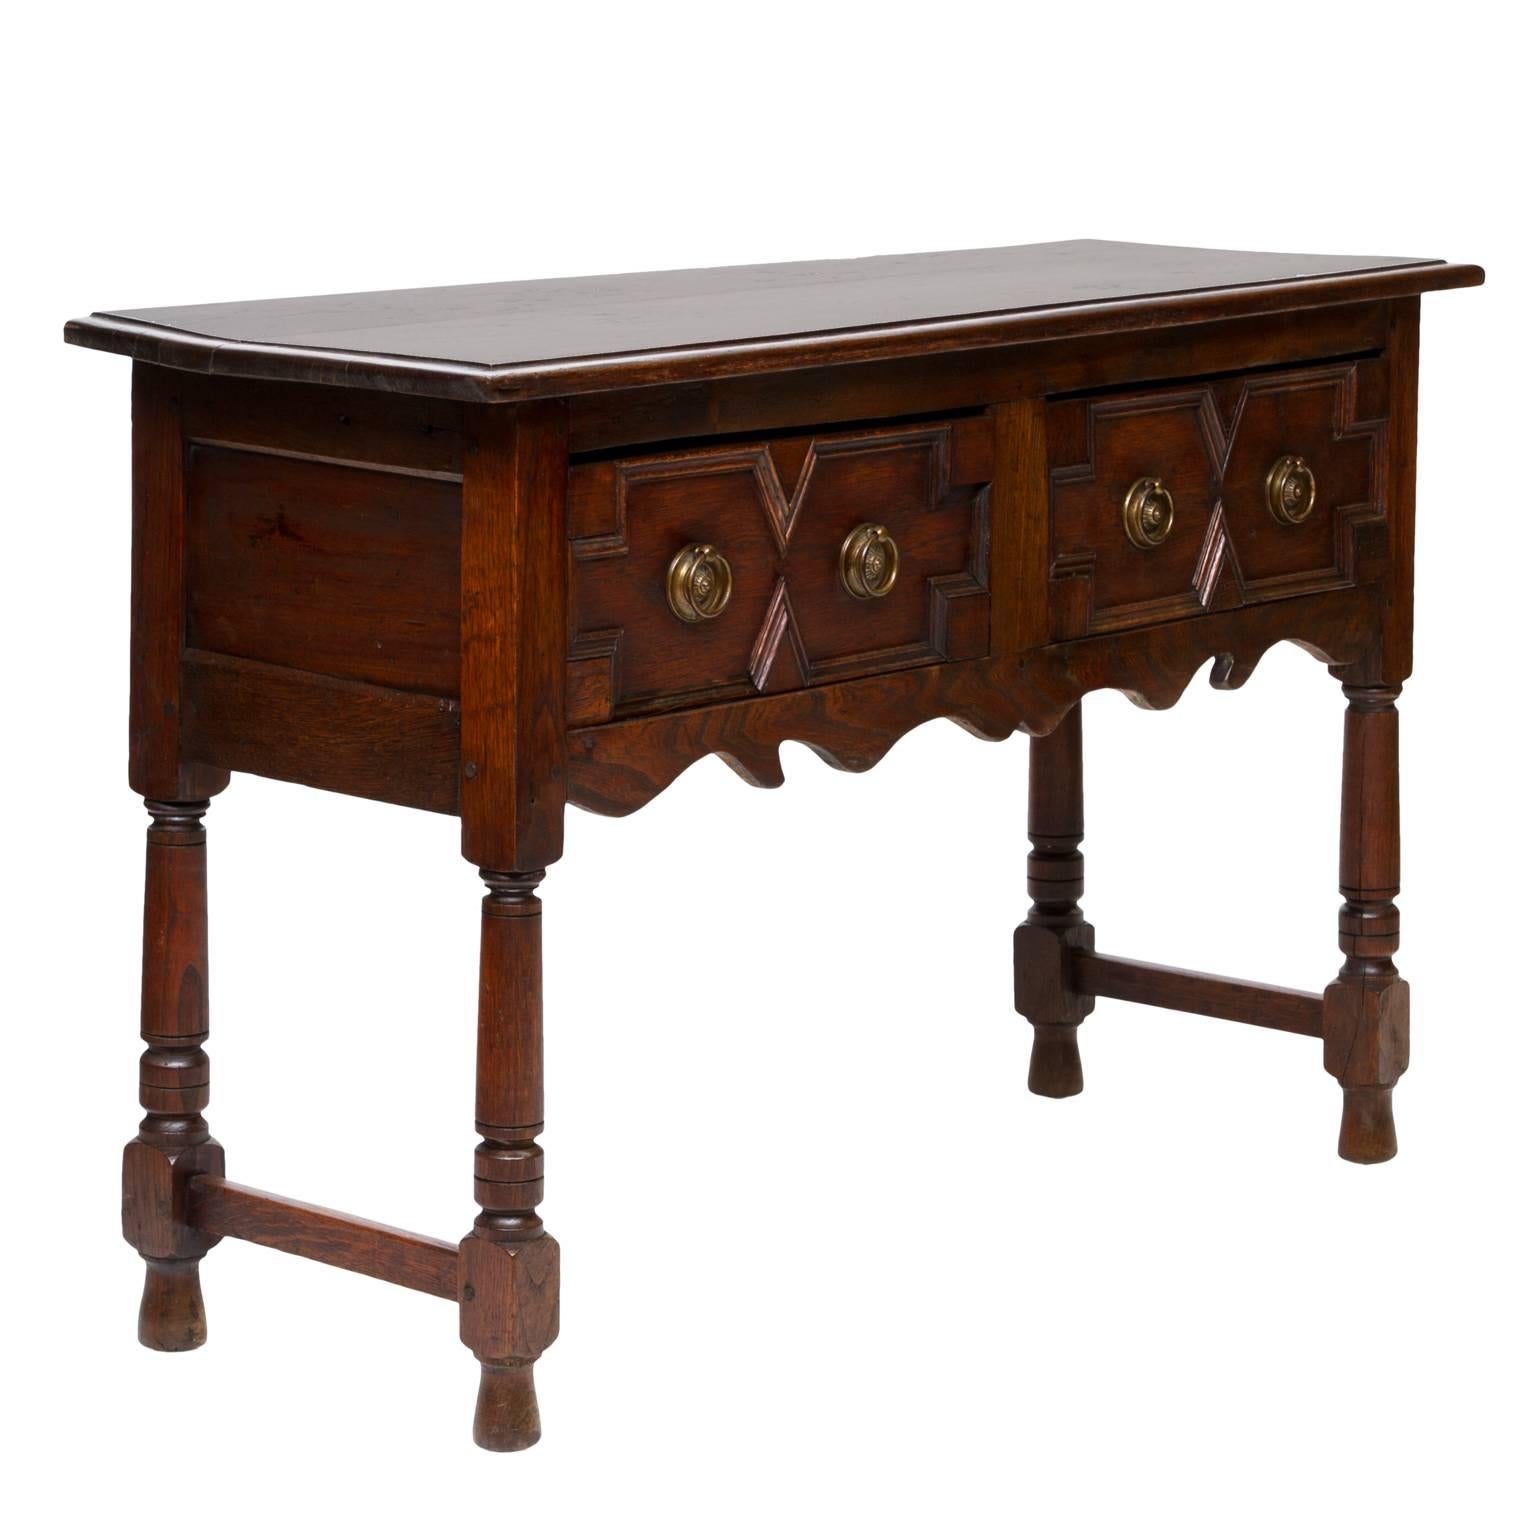 19th century Jacobean oak console table with two drawers. There is a nice two board top, raised panel sides, turned legs joined with stretchers. Notice the geometric patterns to the fronts of the drawers. Thick moldings used to differentiate color